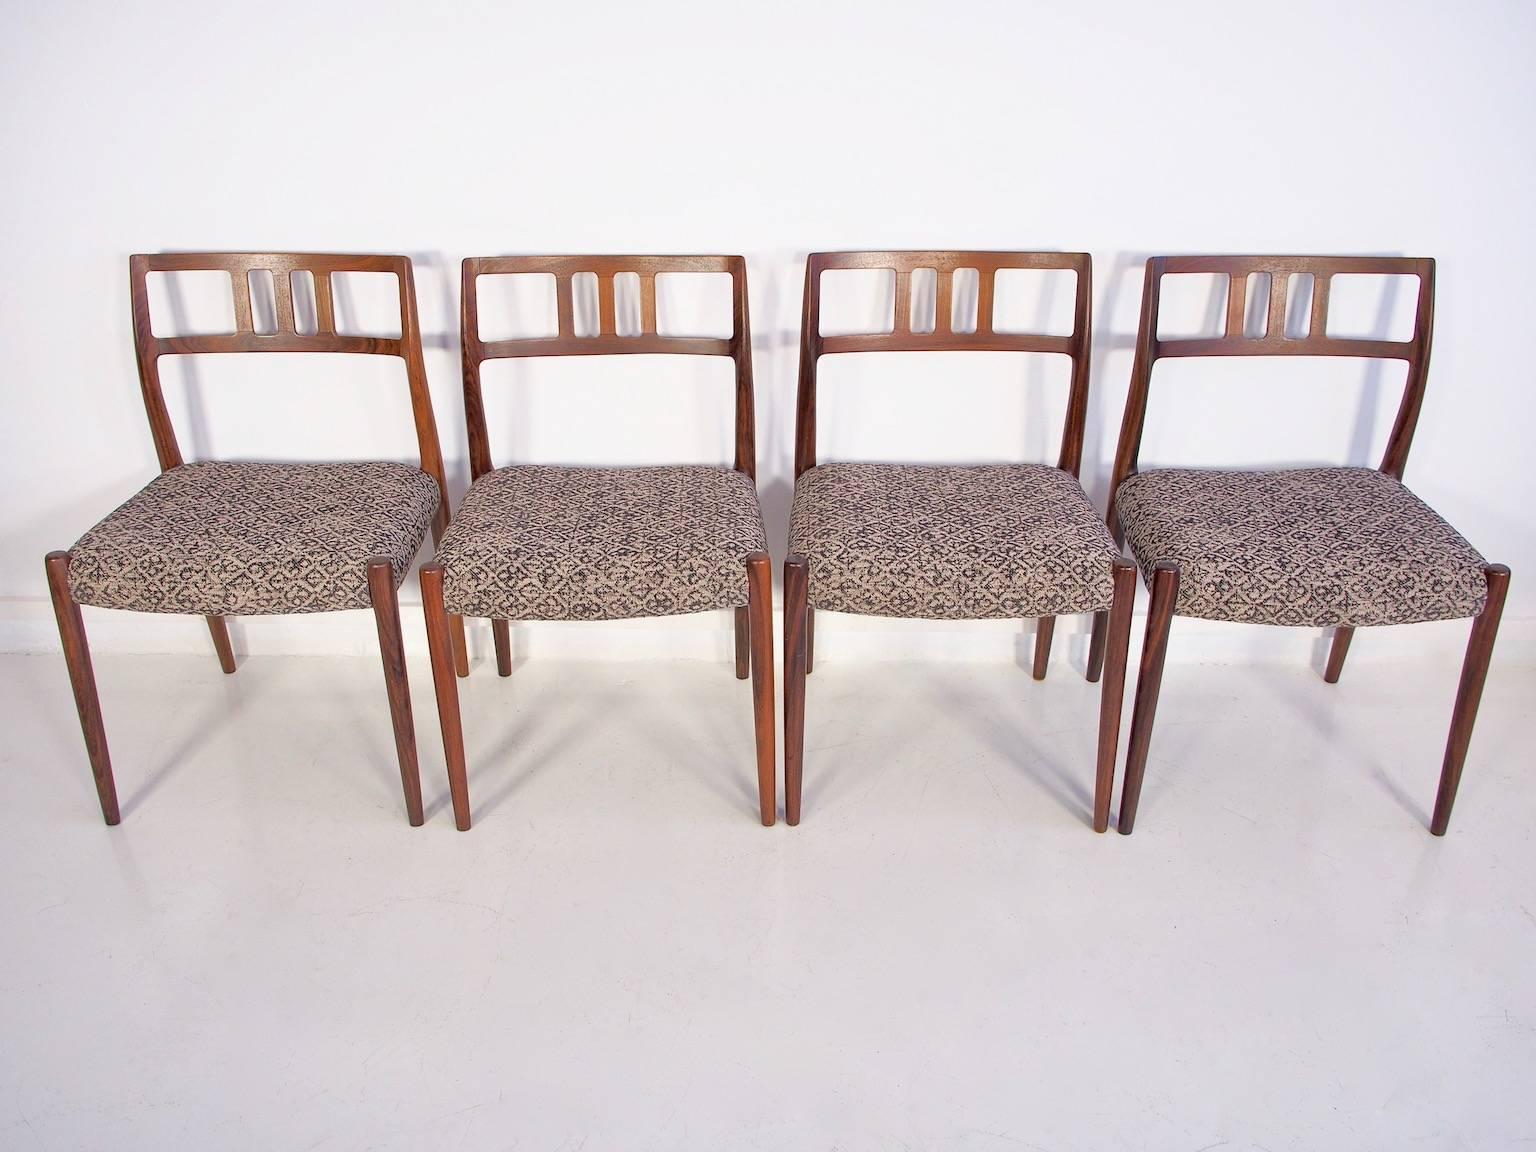 This set of four Niels O. Møller hardwood chairs has been recently reupholstered and restored. Model 79 designed in 1966 and produced by J.L. Møller.